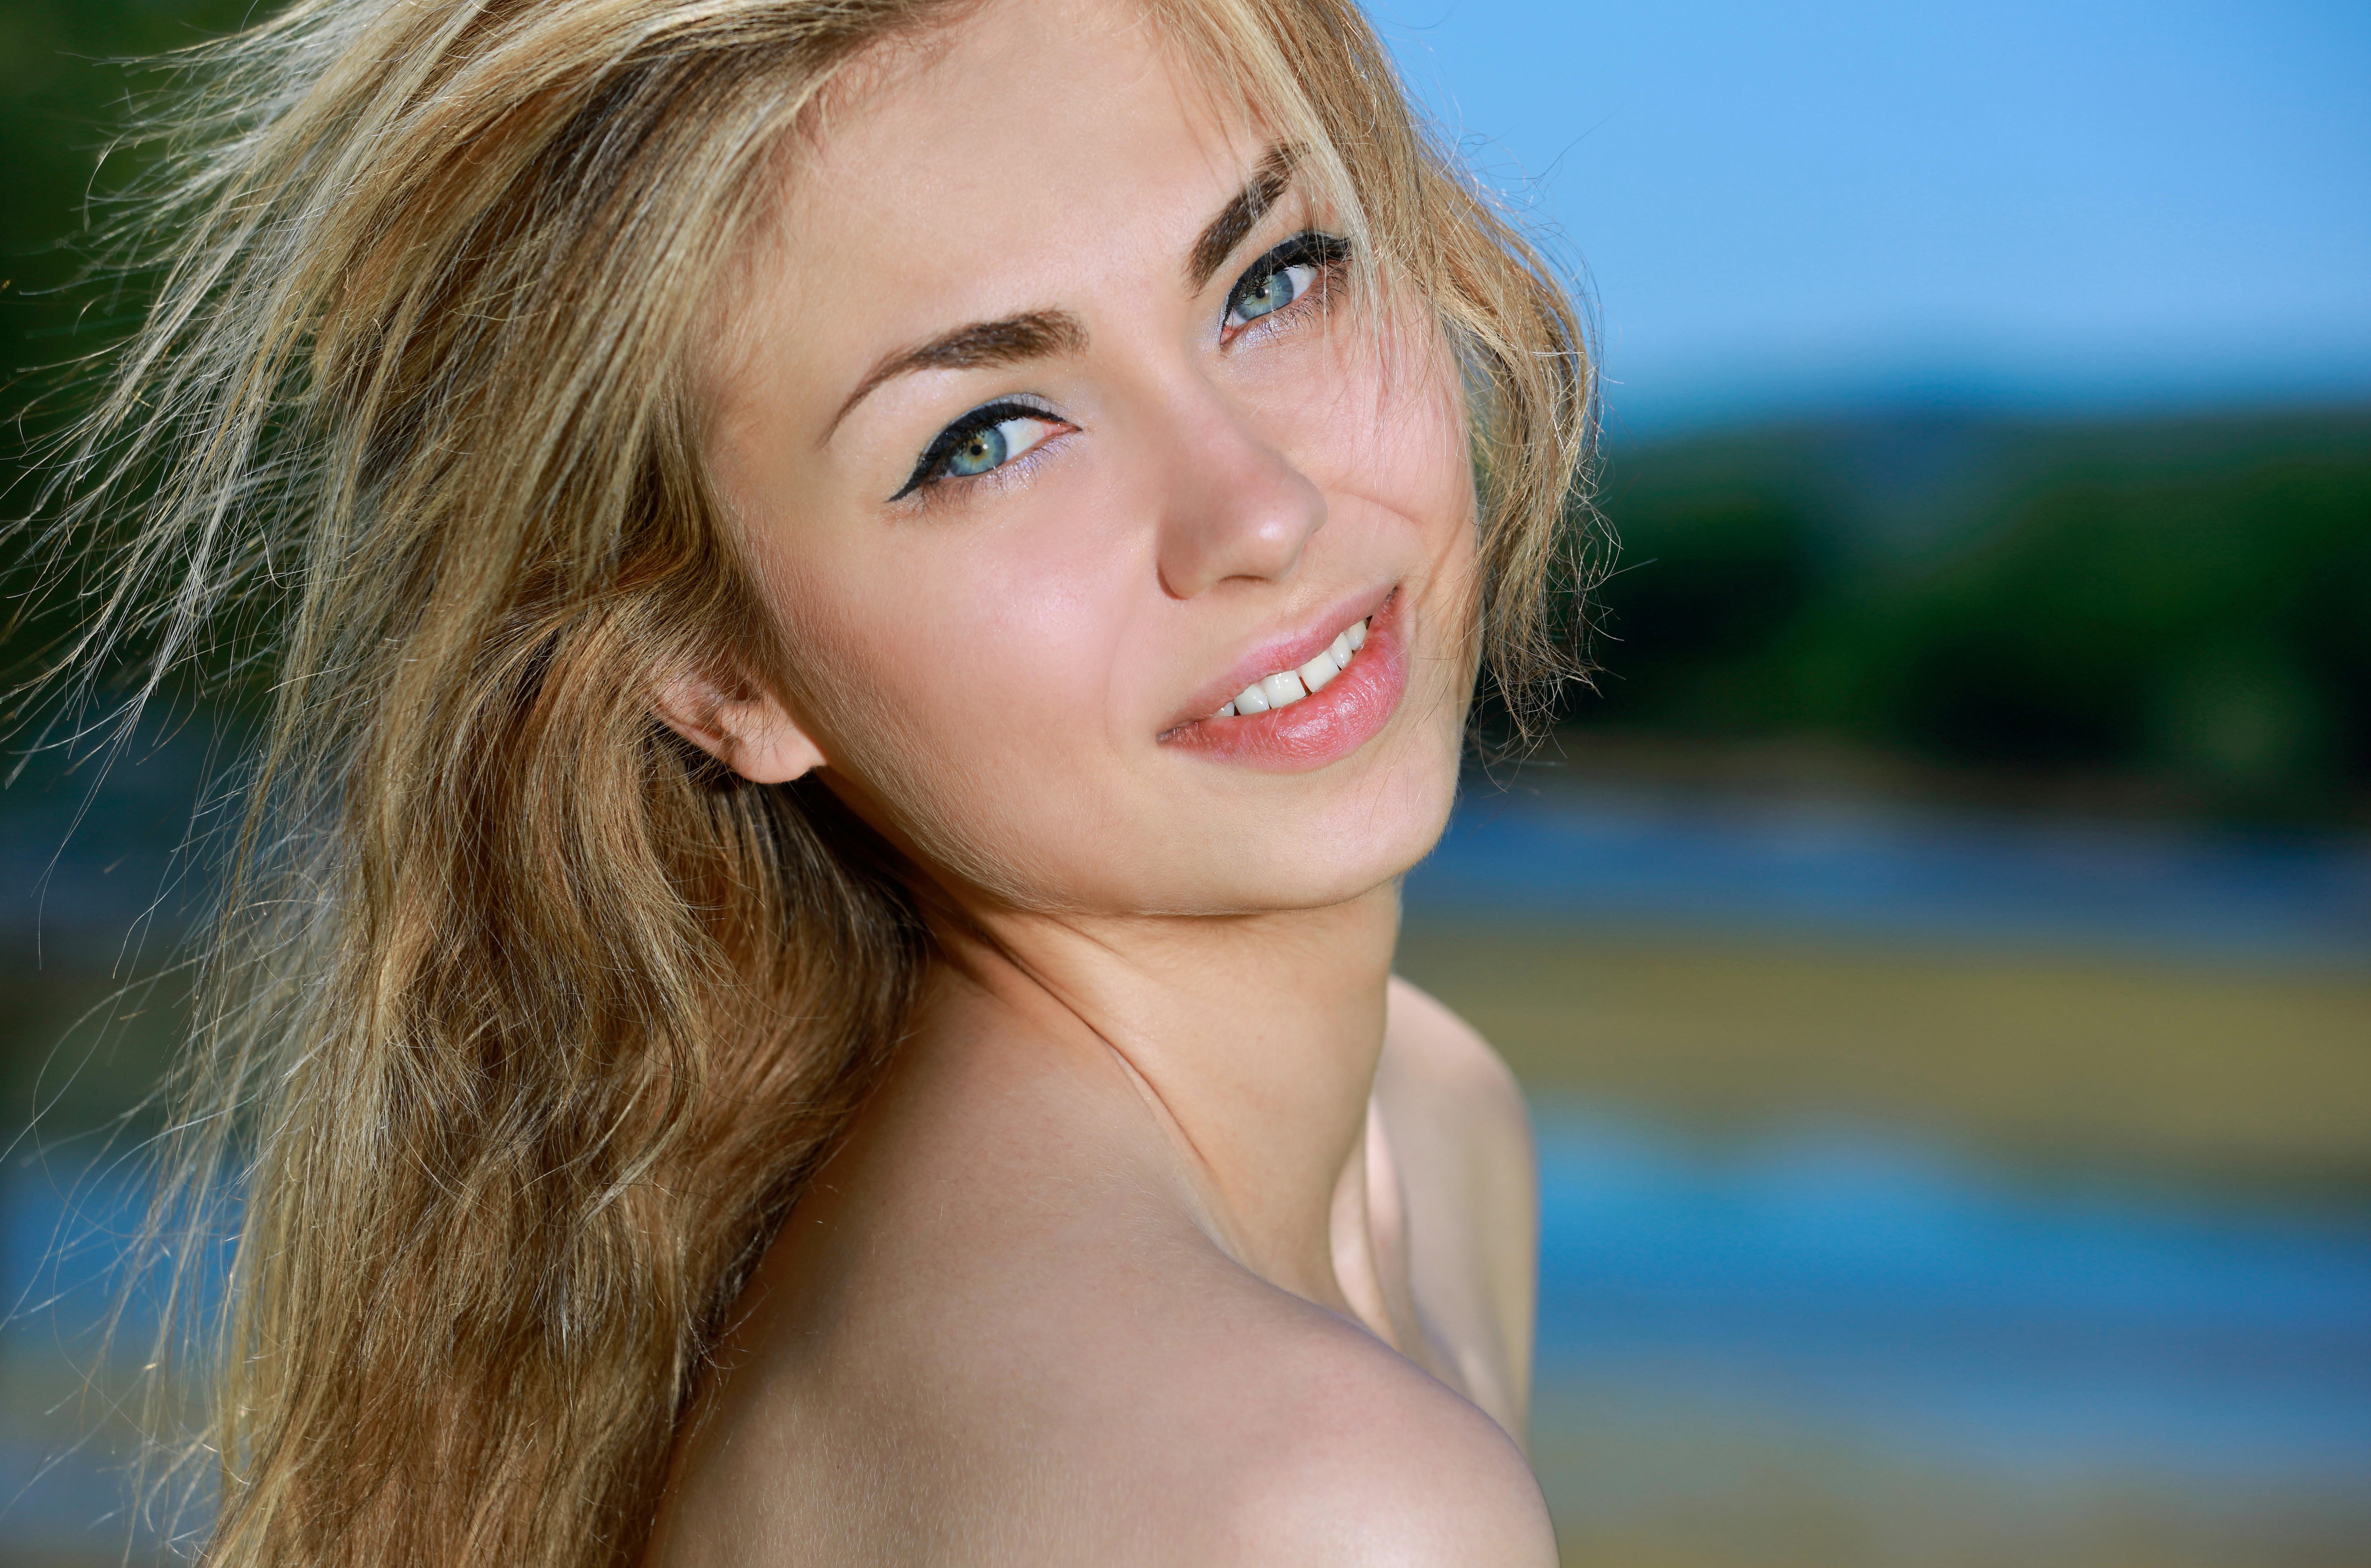 model girl wallpaper,hair,blond,face,hairstyle,beauty